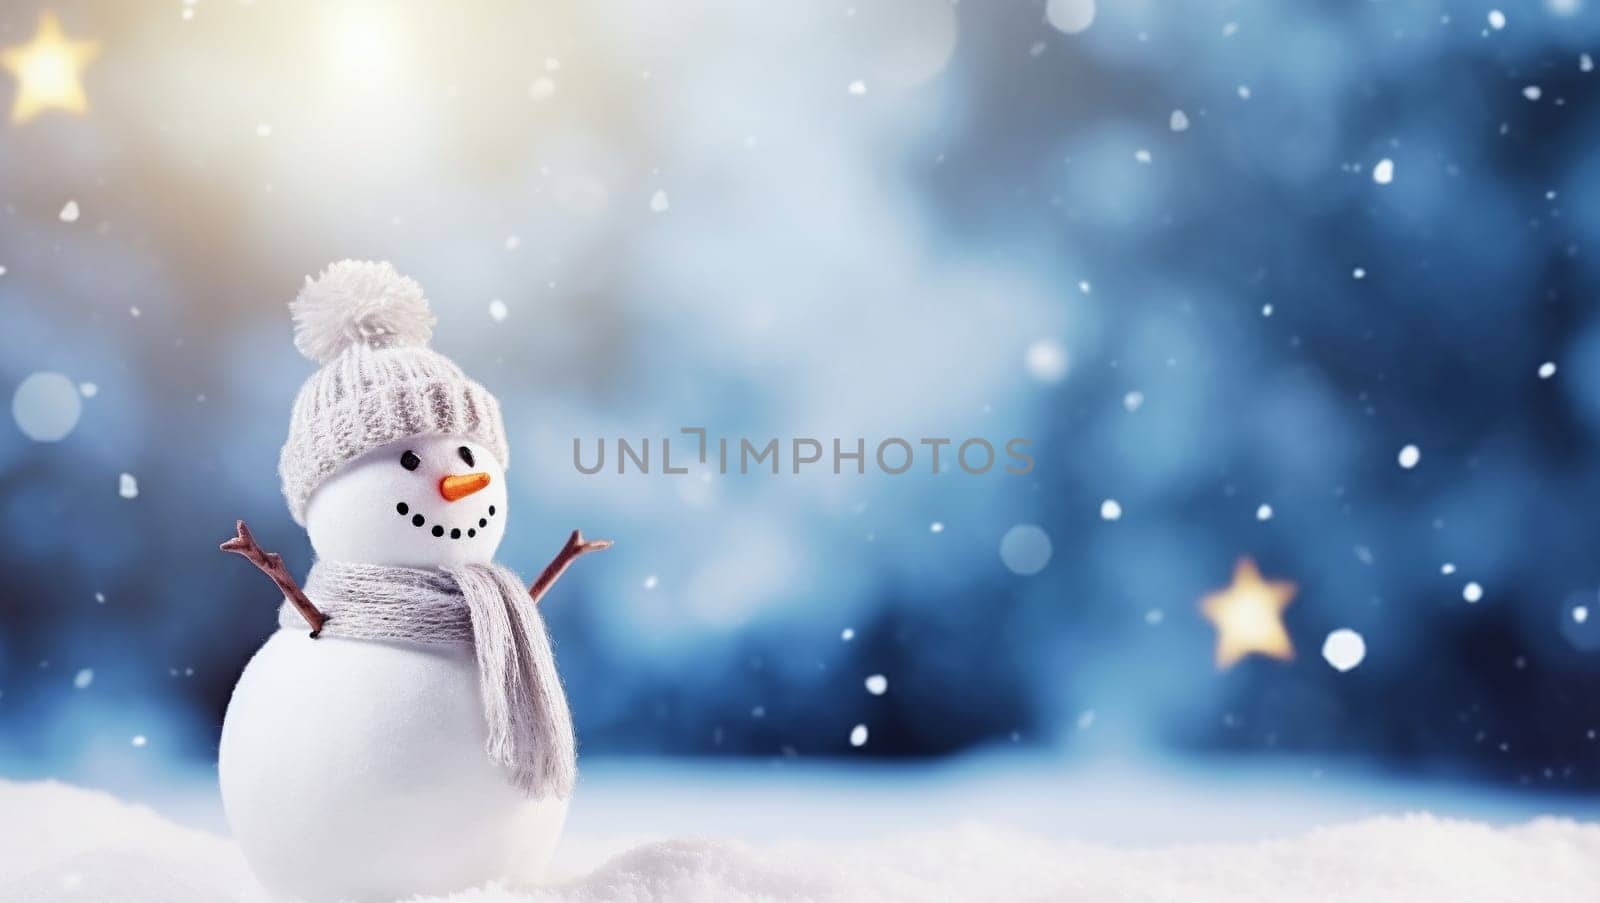 Snowman on the background of snow. Christmas background with a snowman rejoicing in the holiday. Space for text. High quality photo